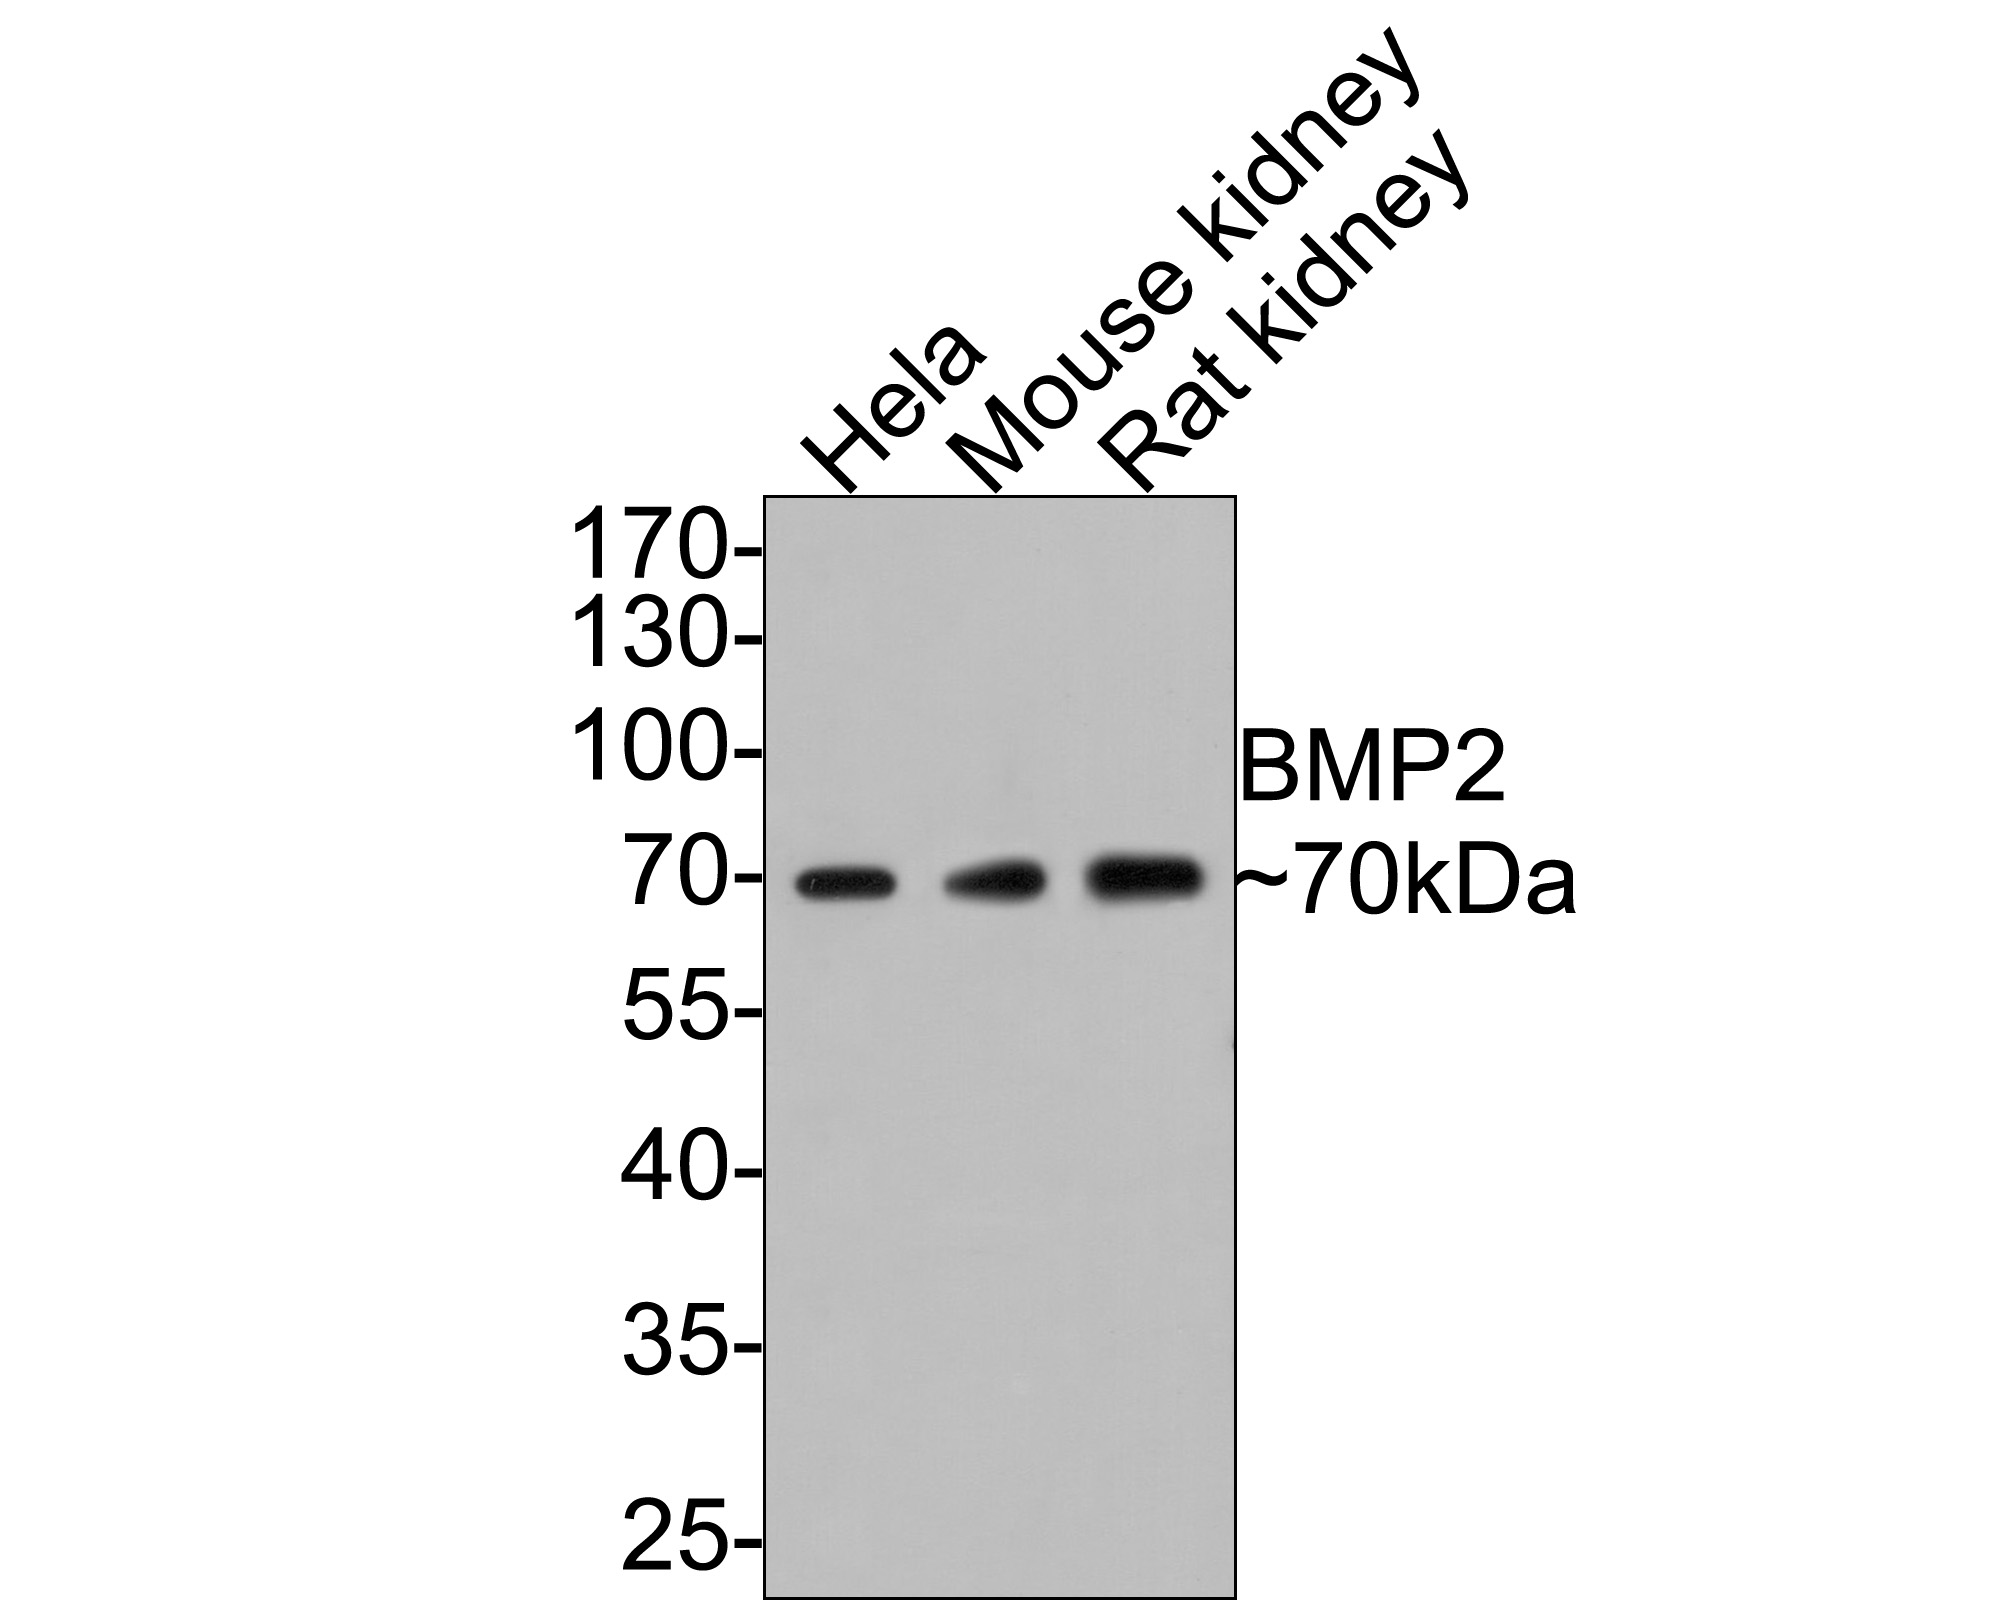 Western blot analysis of BMP2 on different lysates with Rabbit anti-BMP2 antibody (ER80602) at 1/1,000 dilution.<br />
<br />
Lane 1: Hela cell lysate (10 µg/Lane)<br />
Lane 2: Mouse kidney tissue lysate (20 µg/Lane)<br />
Lane 2: Rat kidney tissue lysate (20 µg/Lane)<br />
<br />
Predicted band size: 45 kDa<br />
Observed band size: 70 kDa<br />
<br />
Exposure time: 2 minutes;<br />
<br />
10% SDS-PAGE gel.<br />
<br />
Proteins were transferred to a PVDF membrane and blocked with 5% NFDM/TBST for 1 hour at room temperature. The primary antibody (ER80602) at 1/1,000 dilution was used in 5% NFDM/TBST at room temperature for 2 hours. Goat Anti-Rabbit IgG - HRP Secondary Antibody (HA1001) at 1:300,000 dilution was used for 1 hour at room temperature.